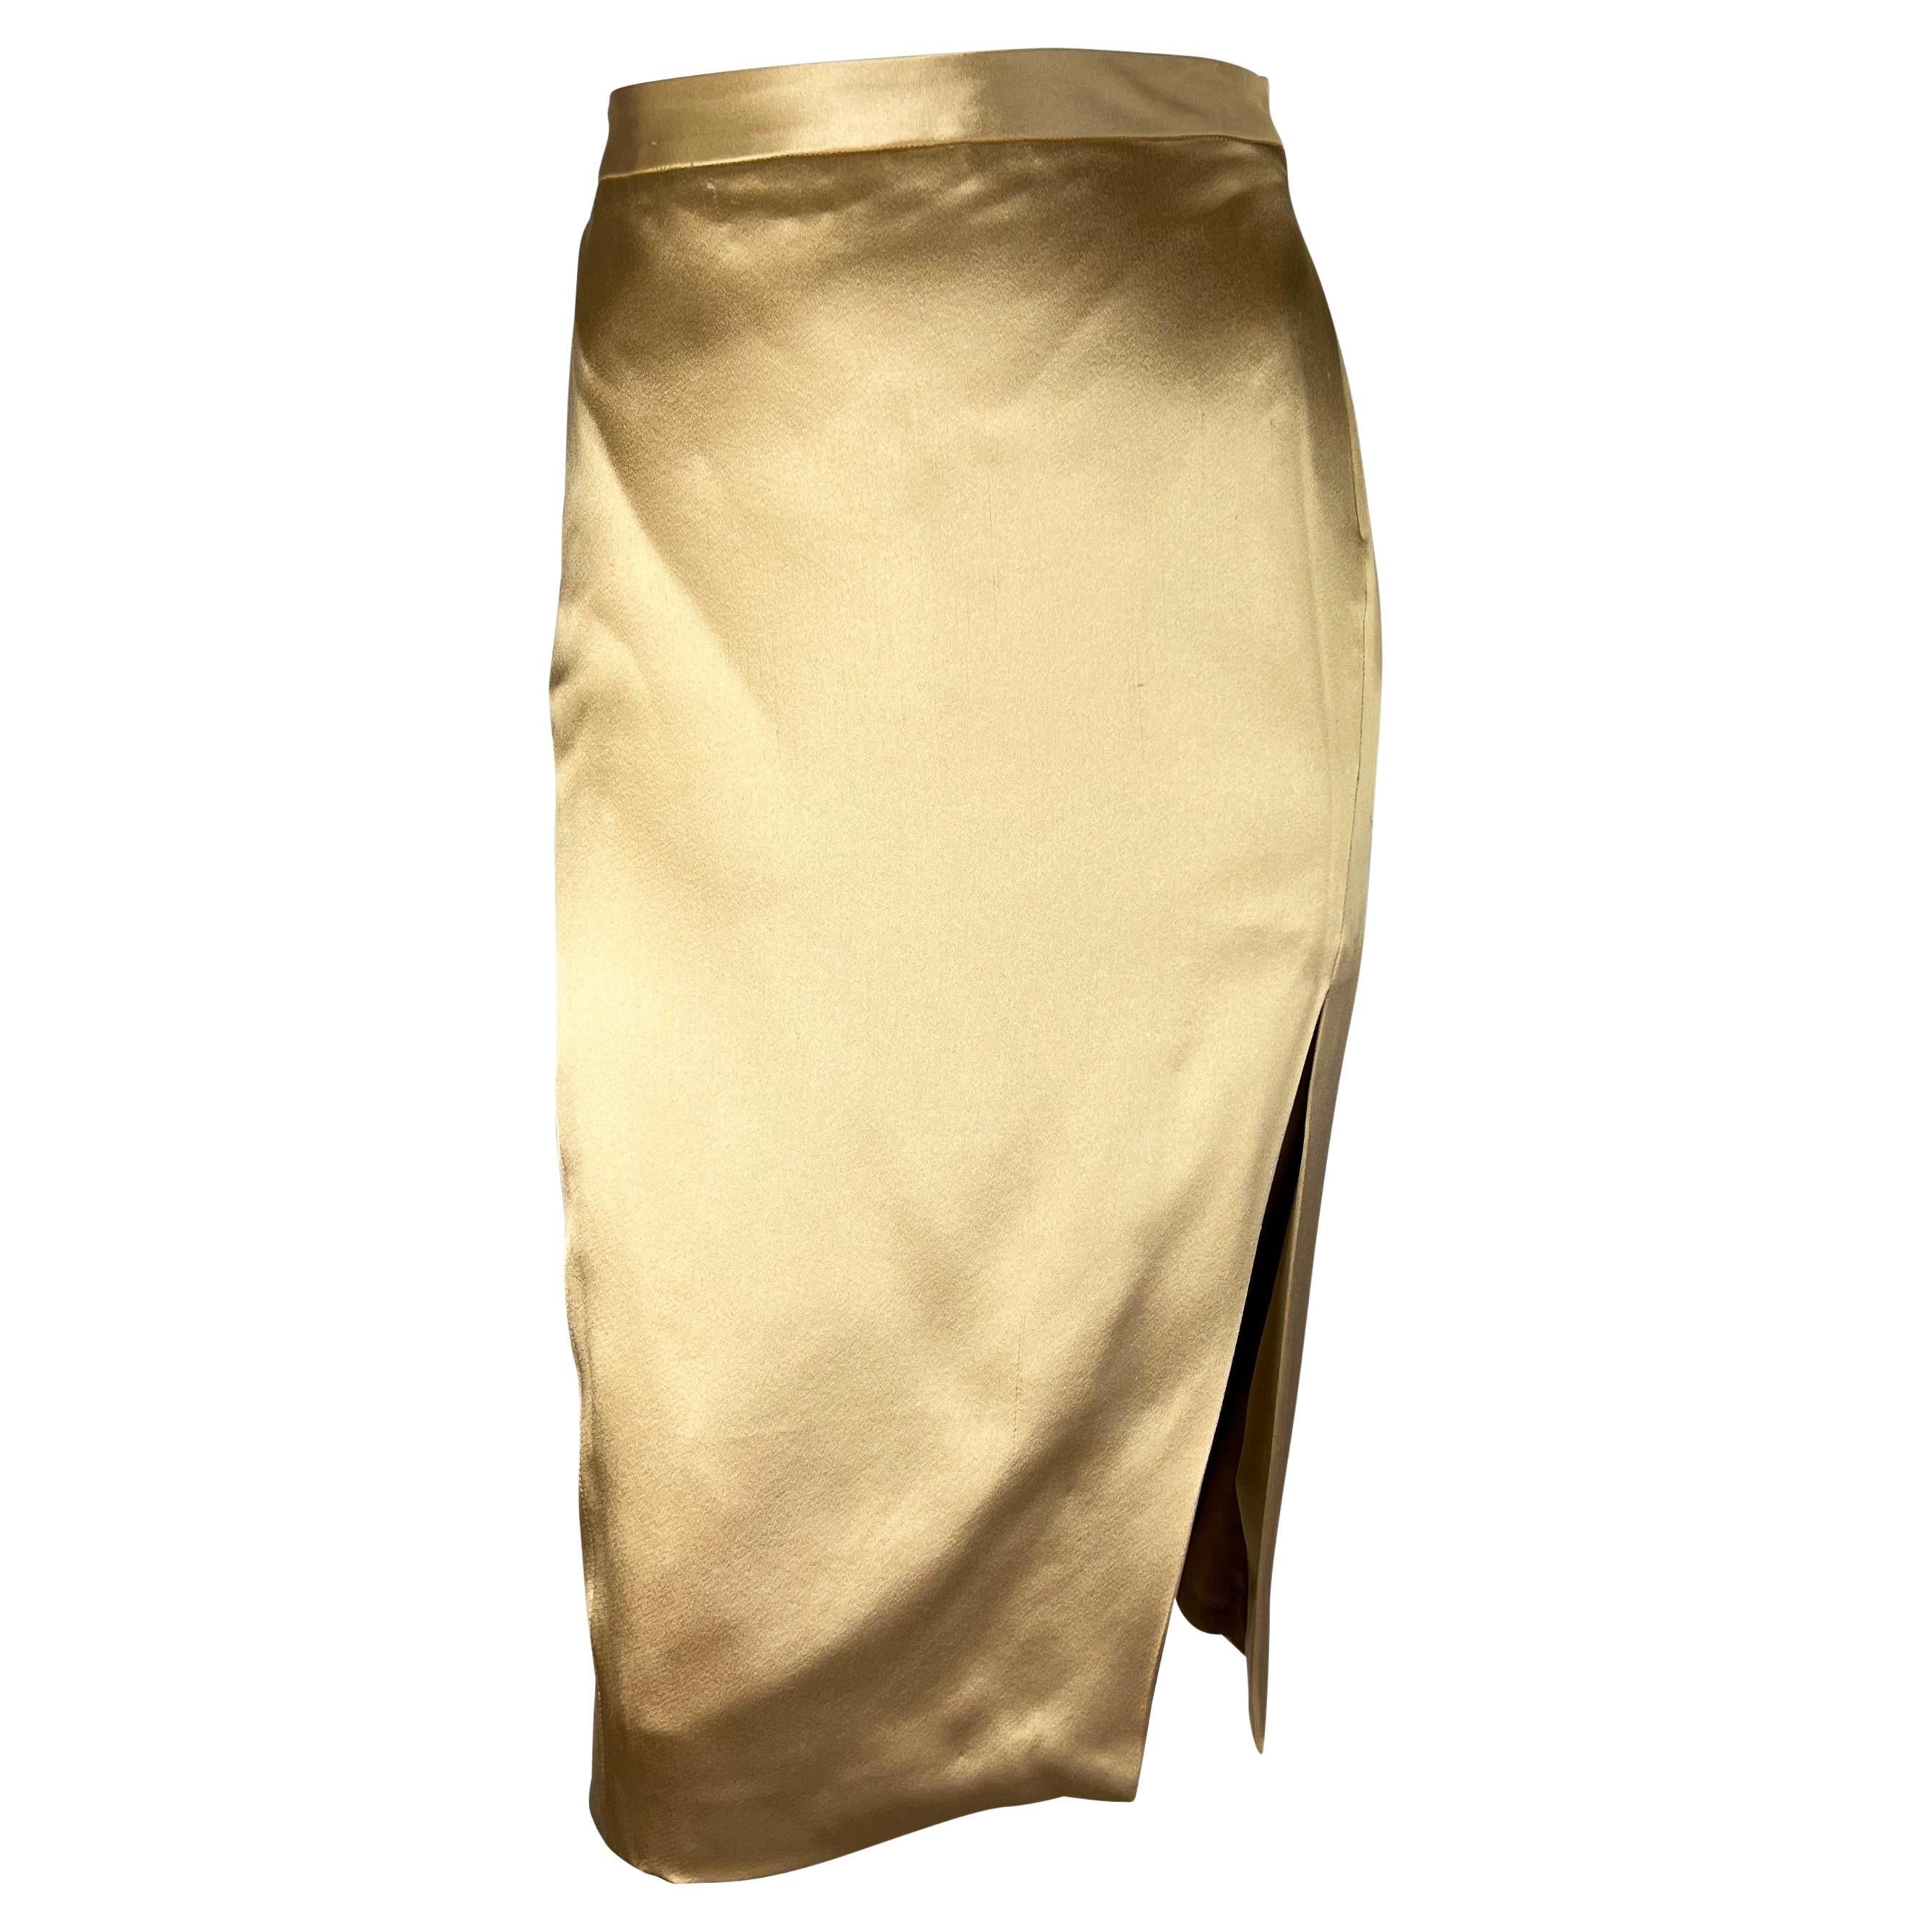 Women's S/S 2001 Gucci by Tom Ford Champagne Silk Satin Sash Belt Sample Skirt Suit